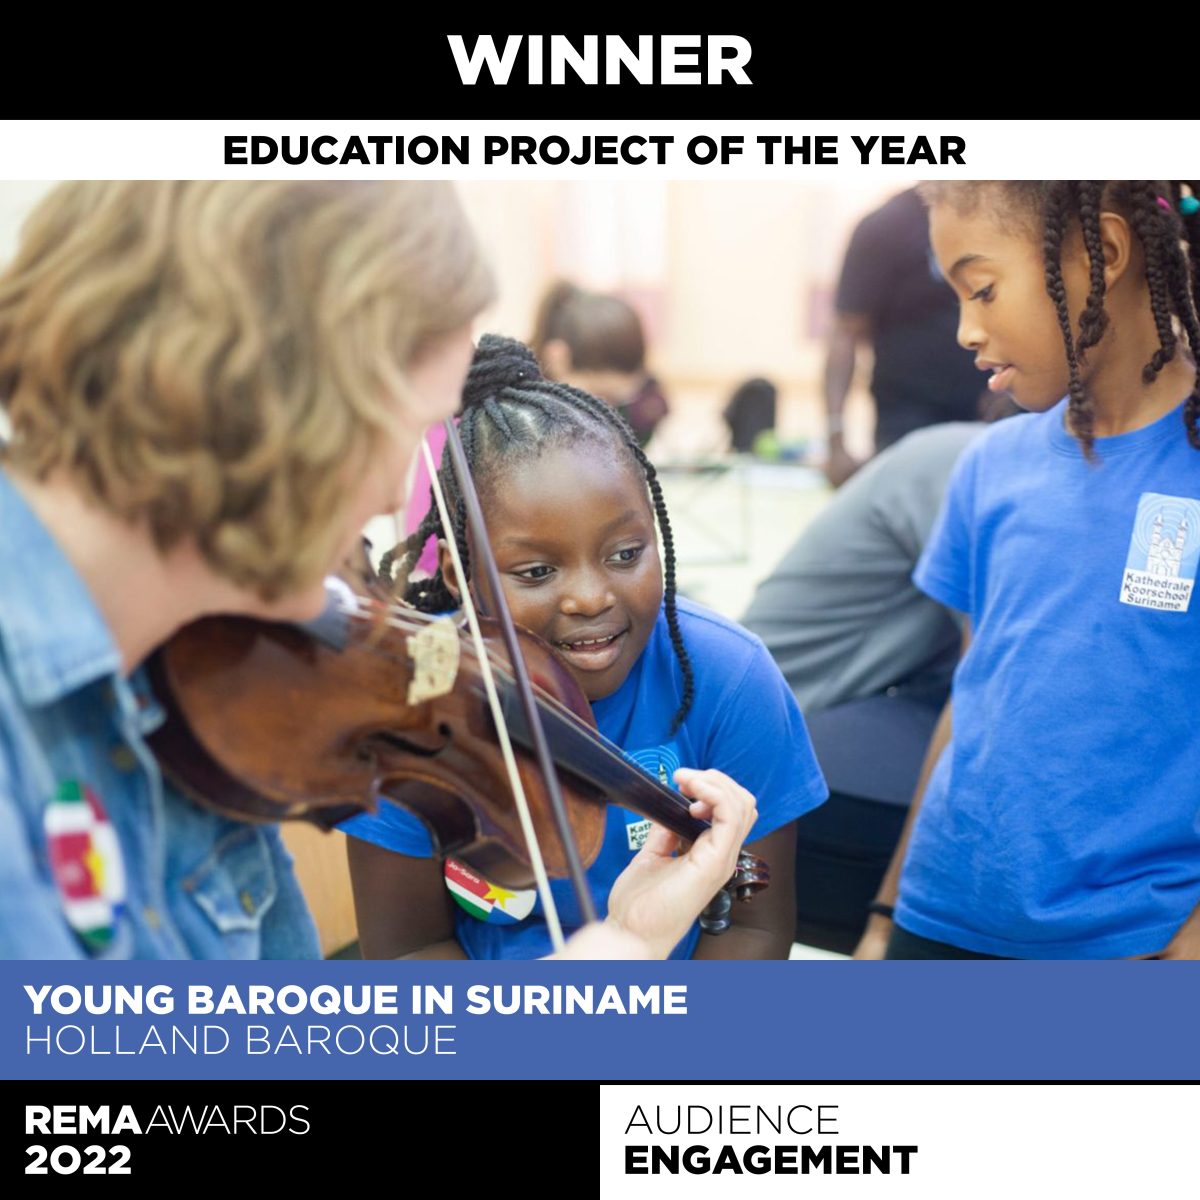 Barok in Paramaribo is Education Project of the Year